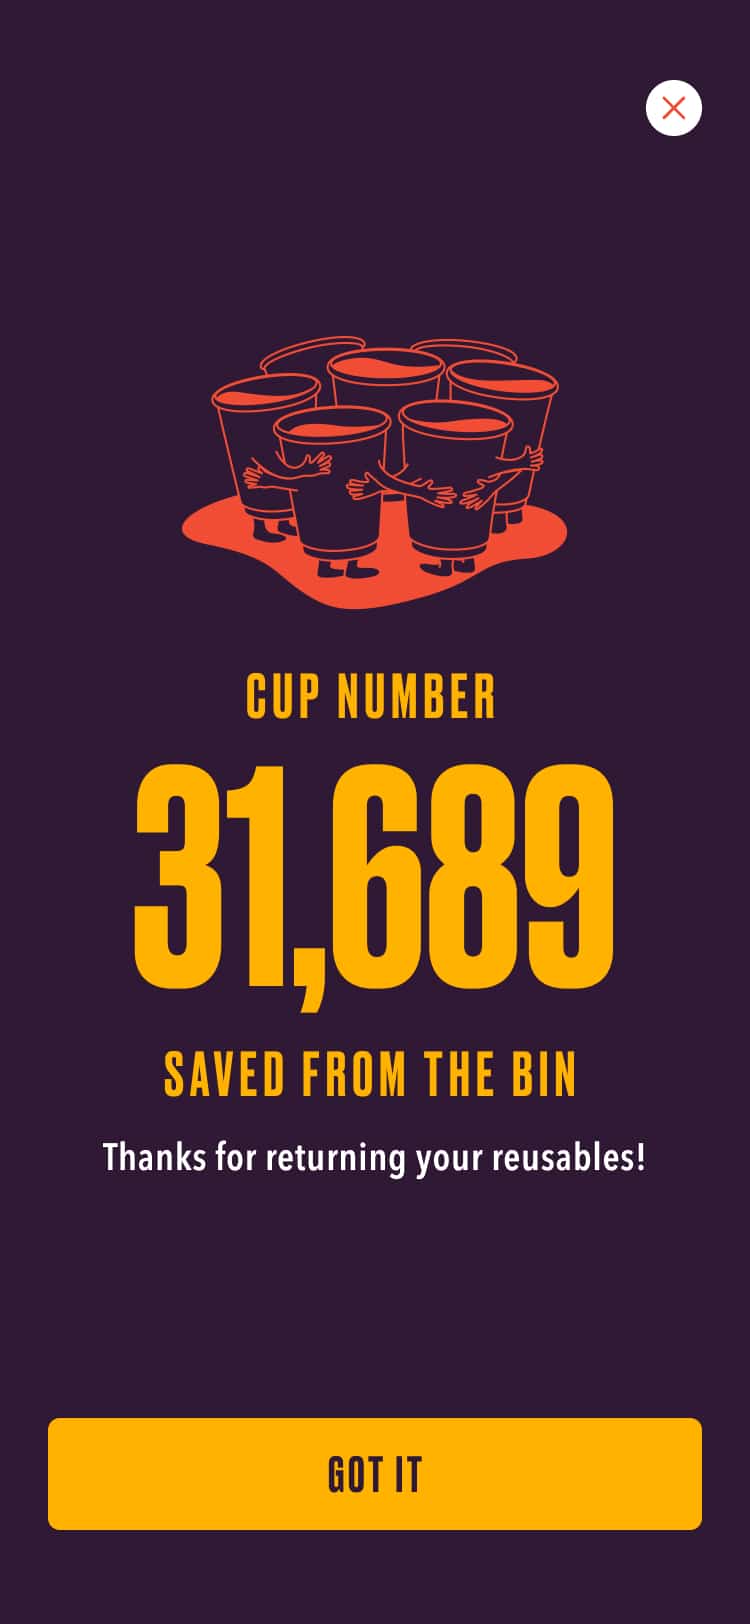 A screen from the CanCan app showing how many cups have been saved from the bin